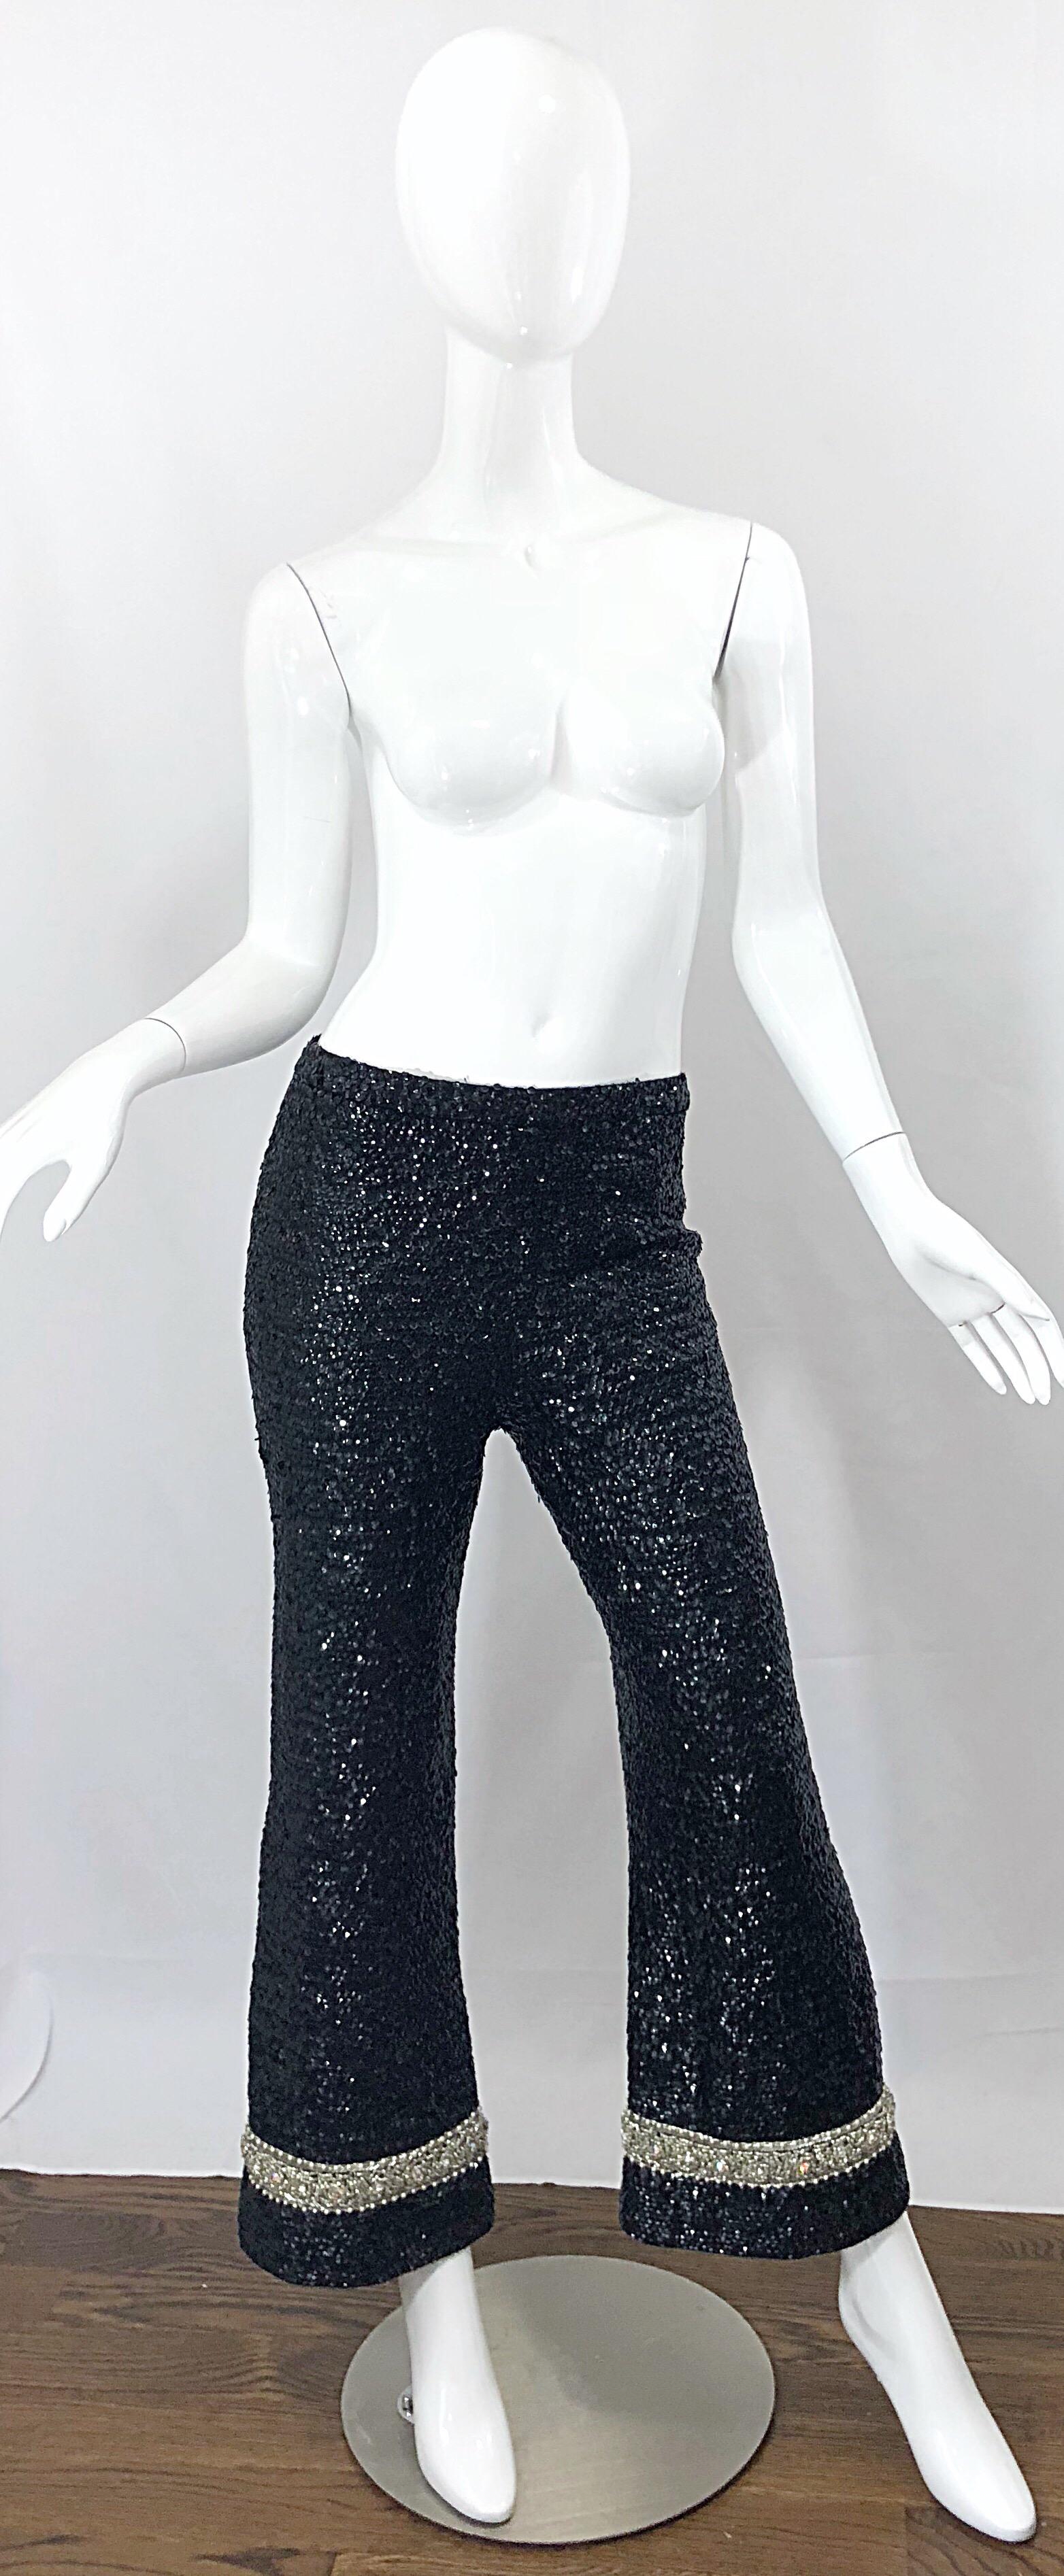 Fabulous vintage late 1960s DE PAUL OF NEW YORK black fully sequined slightly cropped flare leg pants! Features thousands of hand-sewn sequins throughout. Hem of each leg has a trim of iridescent beads, pearls and rhinestones. Super soft virgin wool